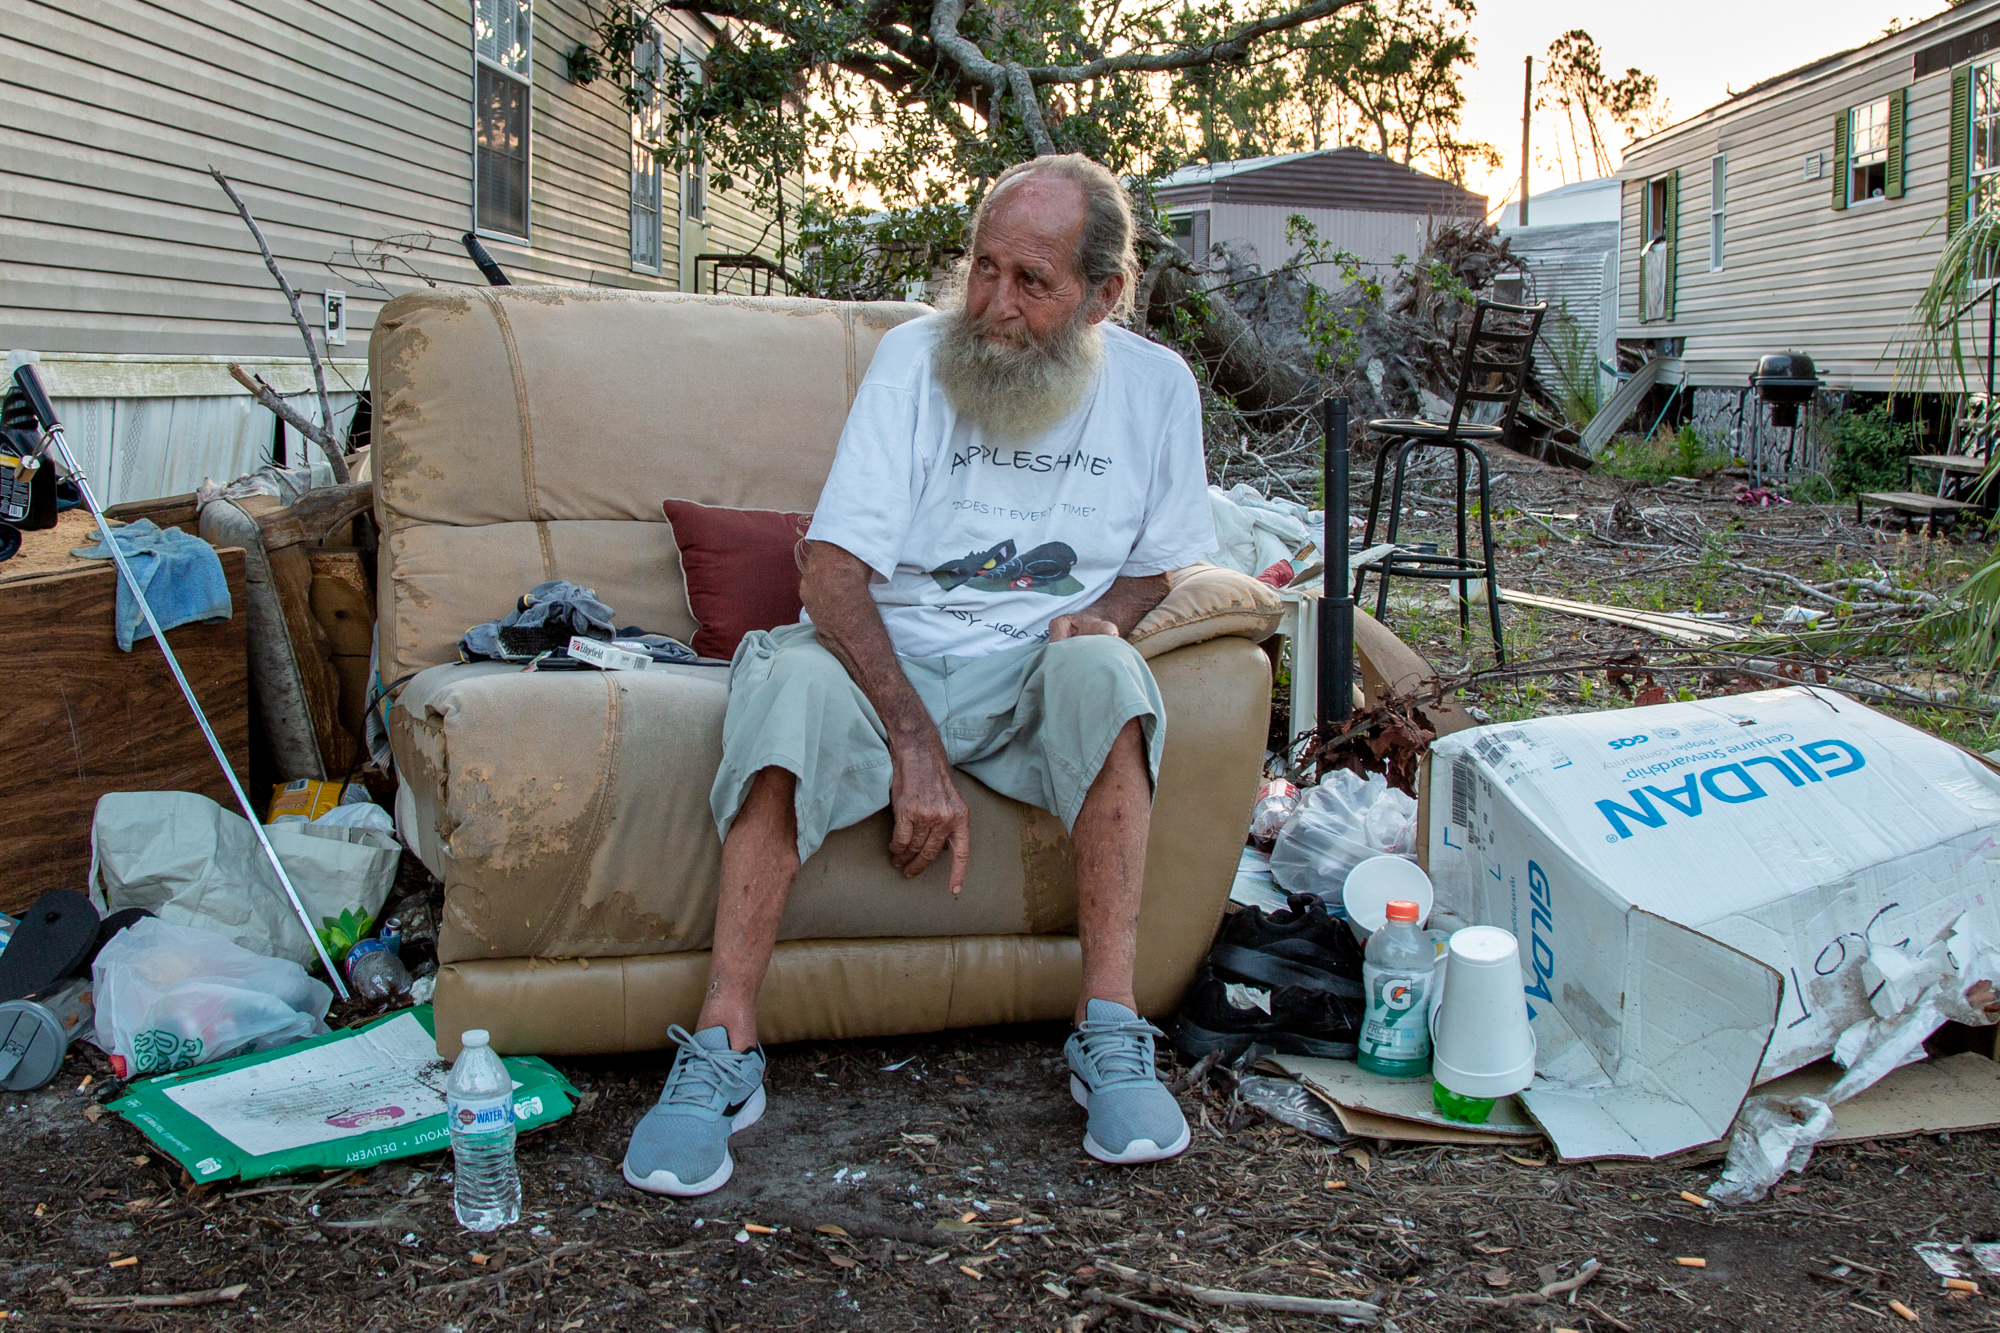 Phillip Ingram - Phillip Ingram, 66, lost his trailer during Hurricane Michael last October, but he still lives in Lynn Haven Mobile Home Park because he can't afford the inflated rent around Panama City, Florida. However, Lynn Haven is slated to close, and remaining residents will have to go. (Jake Goodrick/News21)